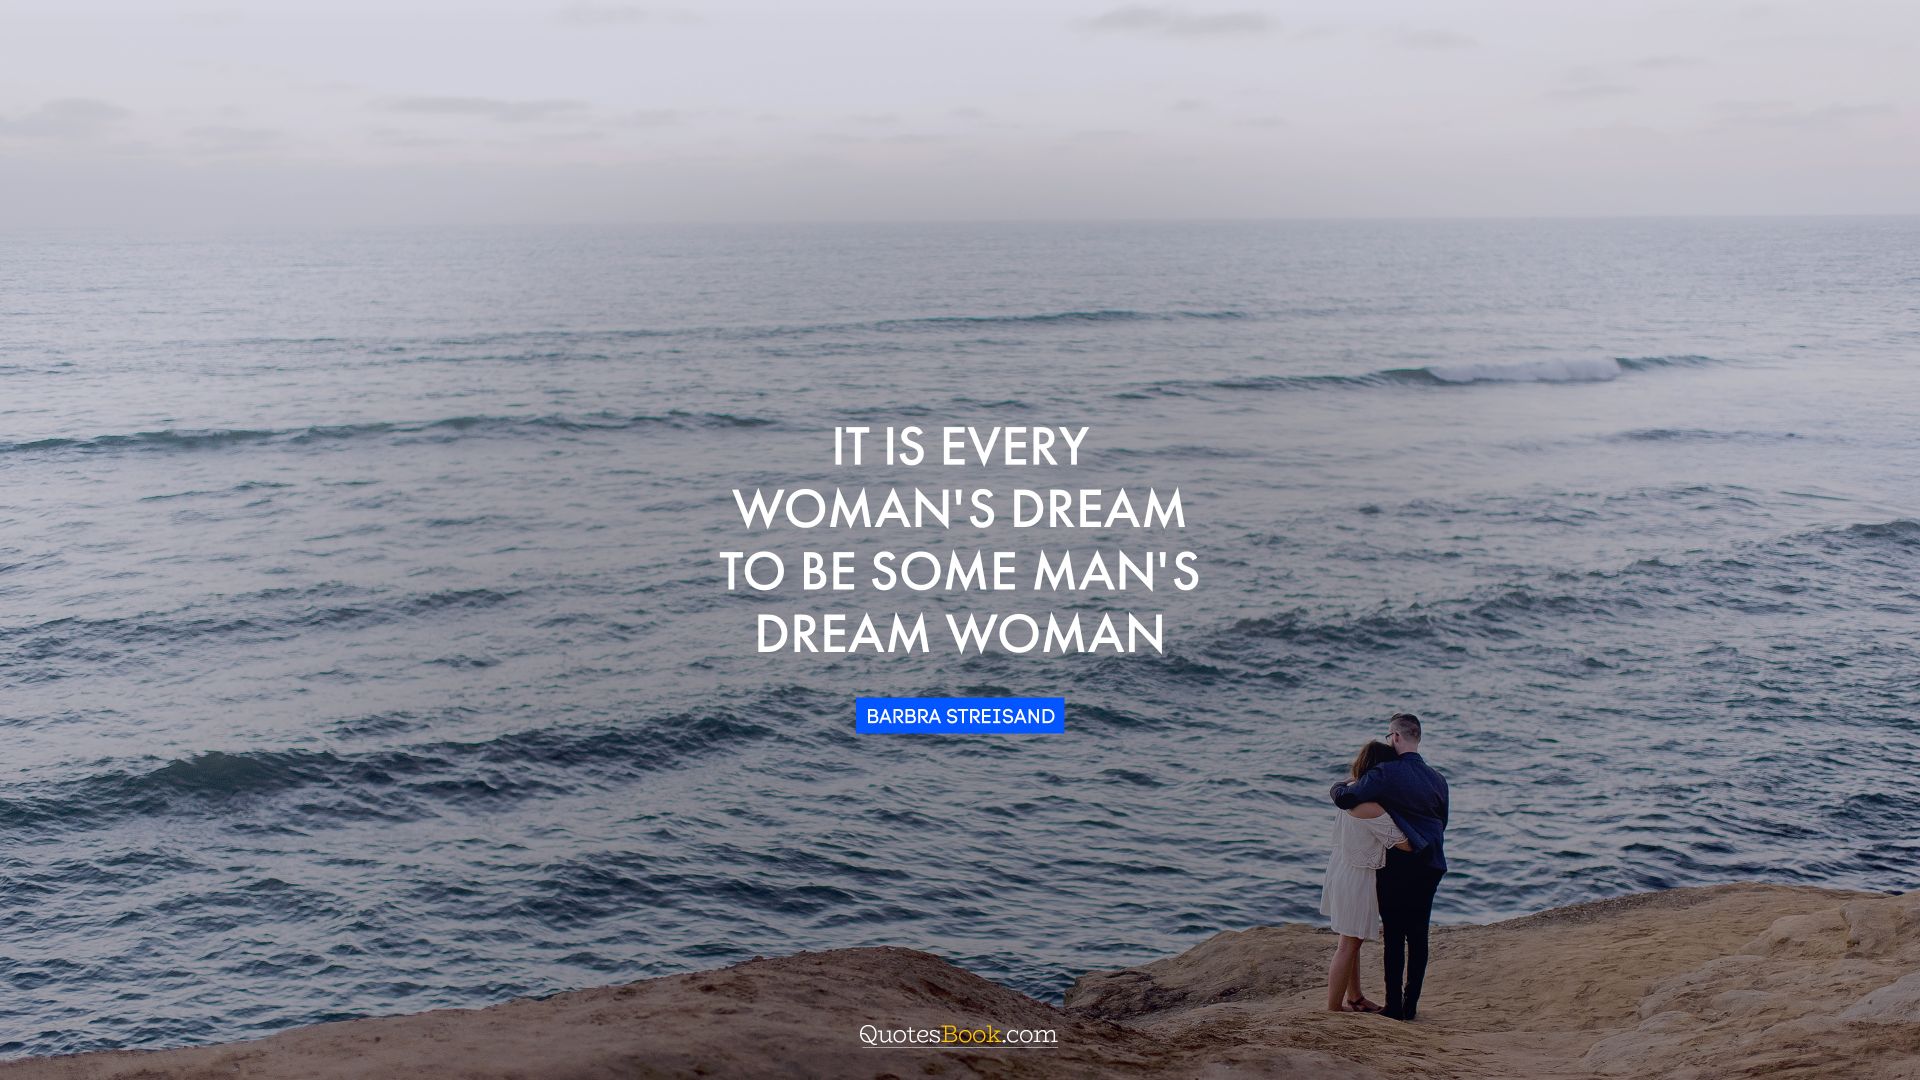 It is every woman's dream to be some man's dream woman. - Quote by Barbra Streisand